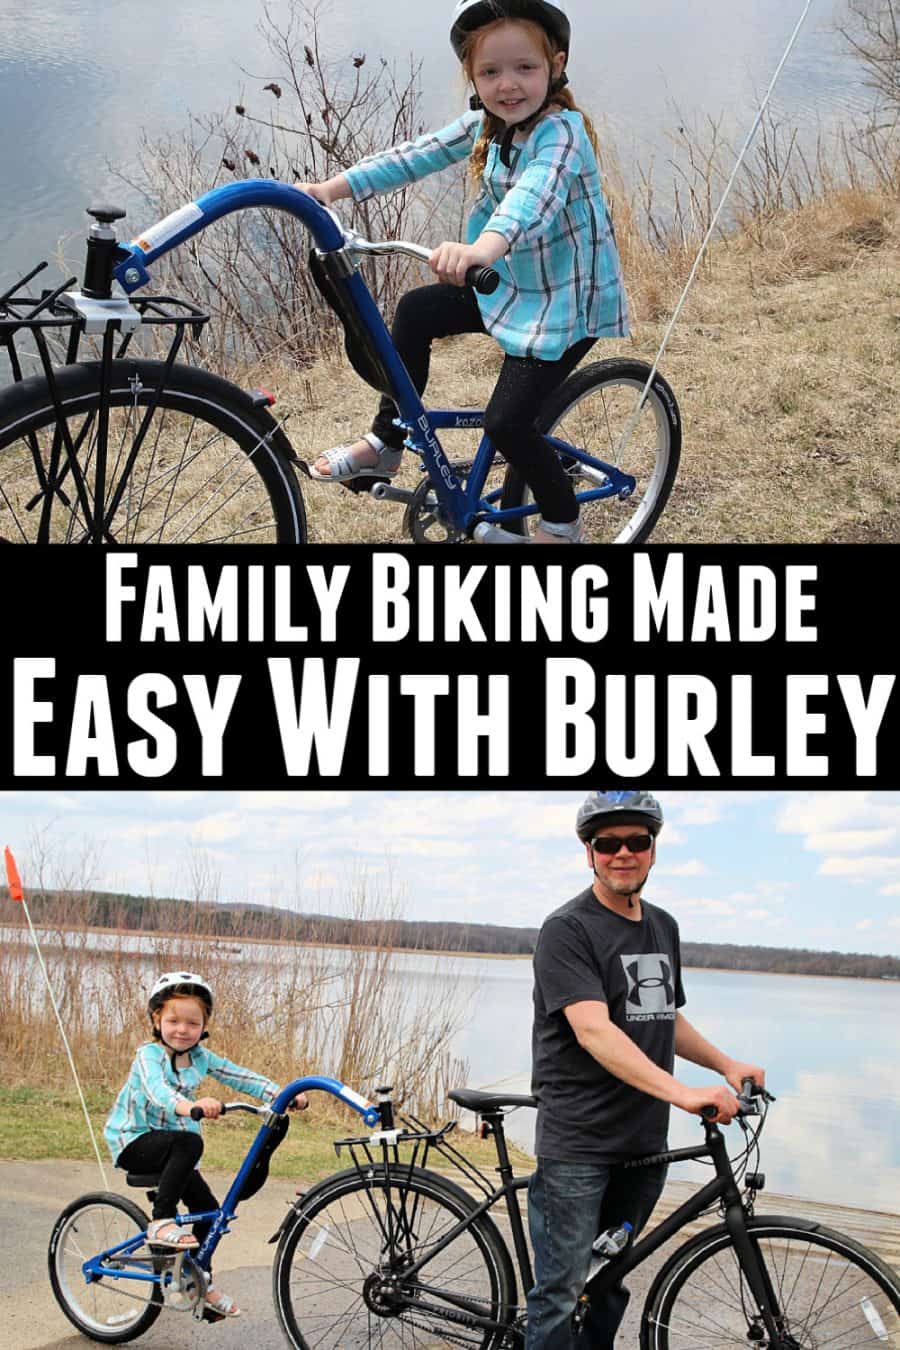 Burley Kazoo Trailercycle Review - Takes The Stress Out Of Family Biking